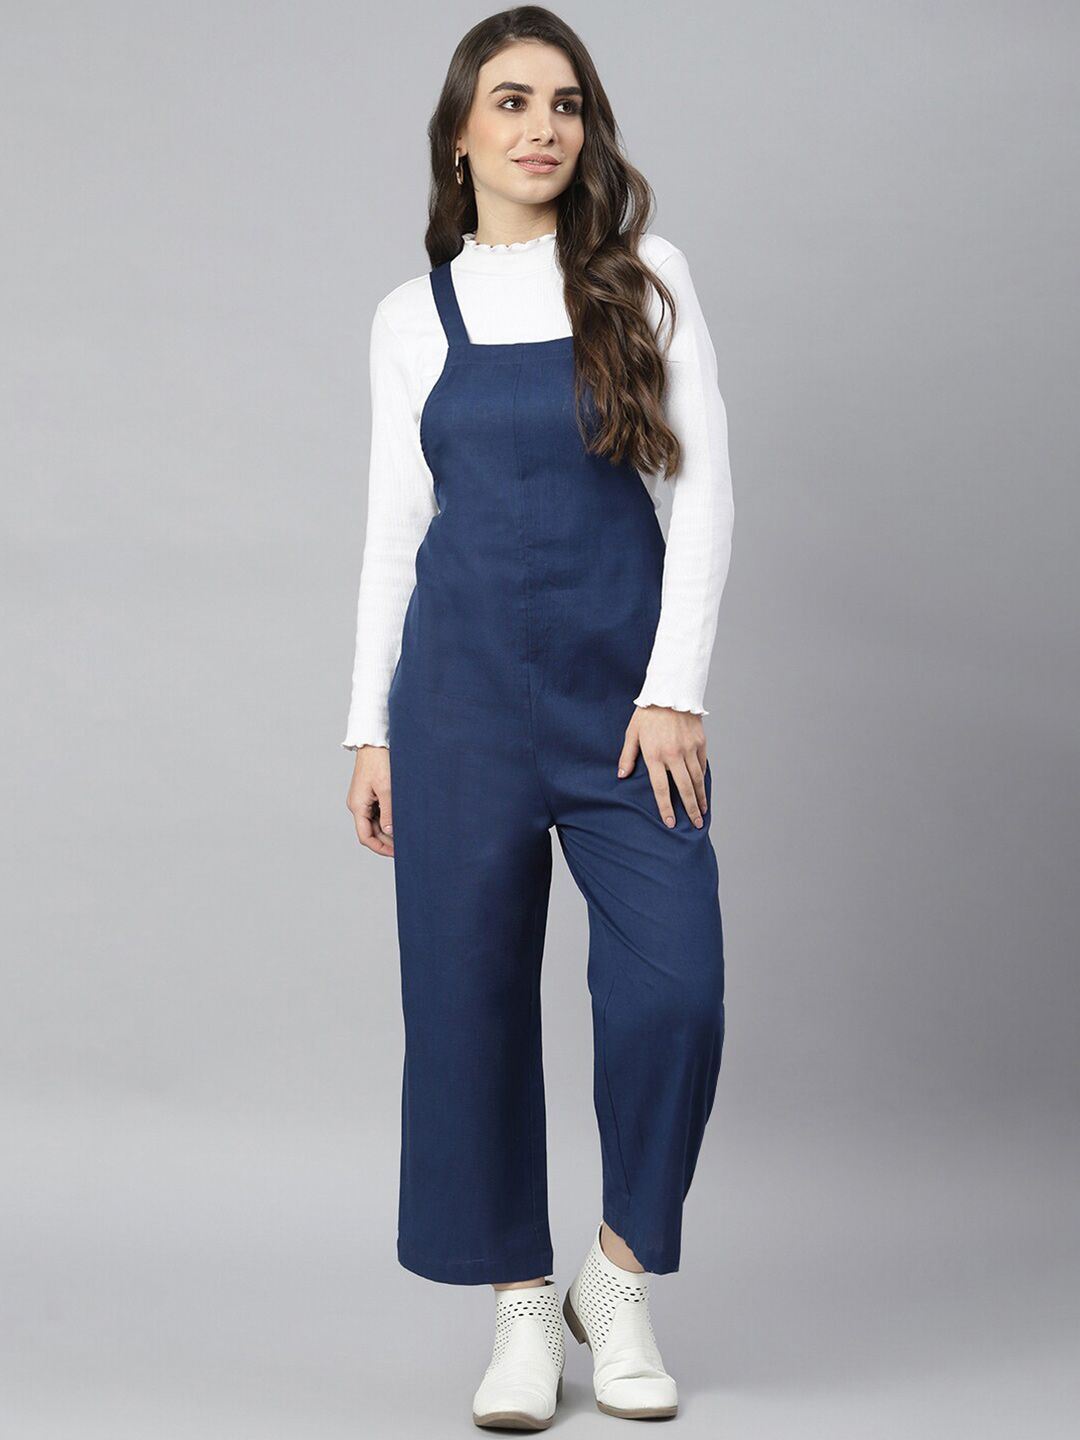 DEEBACO Navy Blue Cotton Basic One Piece Jumpsuit Price in India, Full  Specifications & Offers